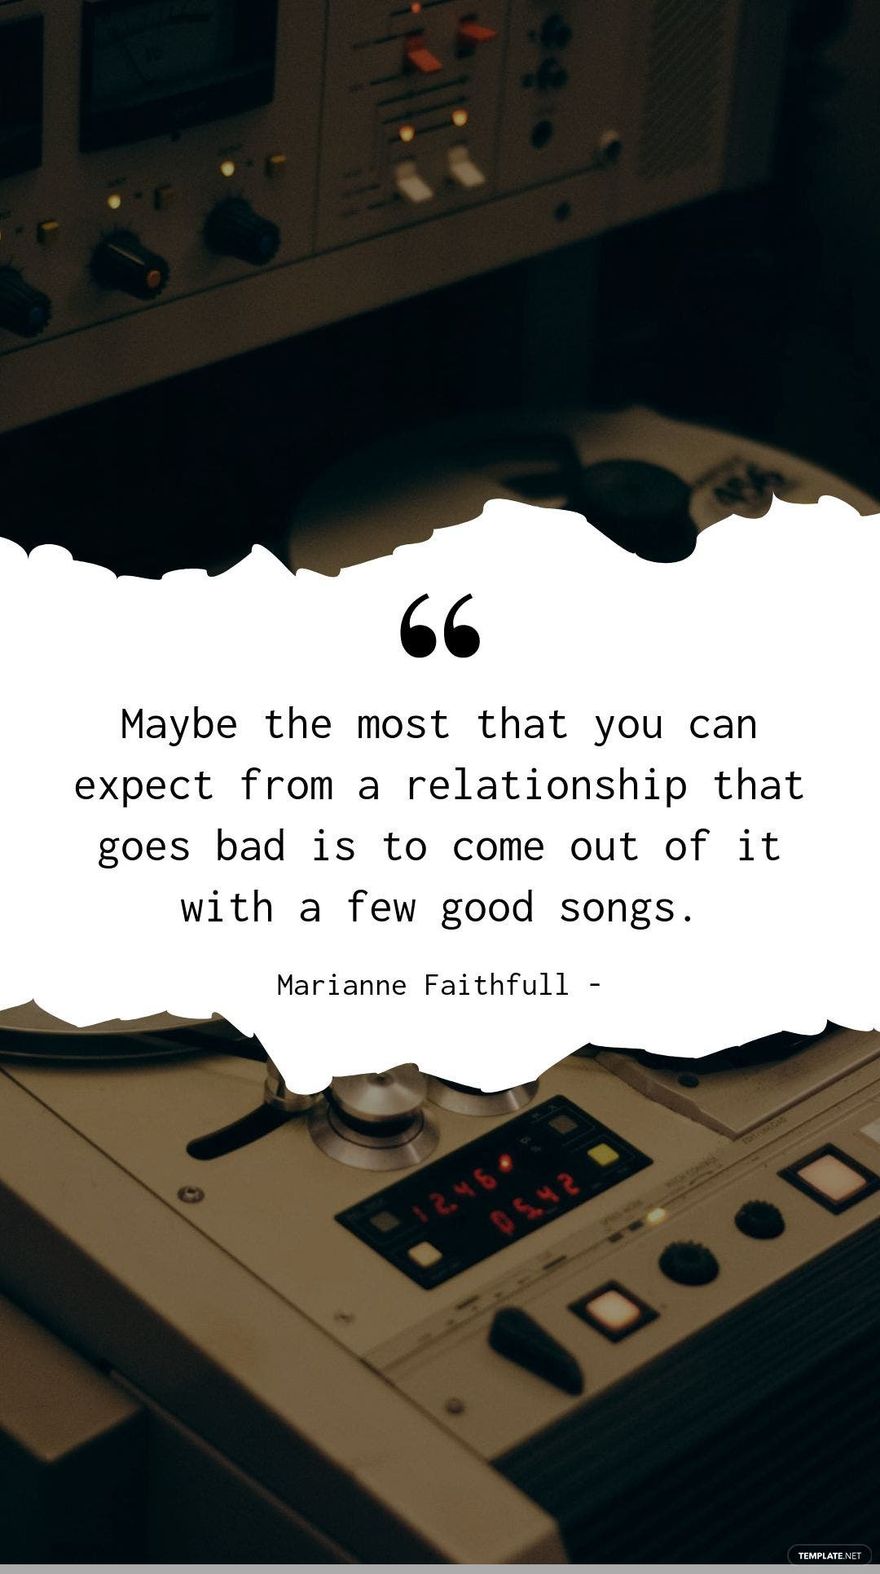 Marianne Faithfull - Maybe the most that you can expect from a relationship that goes bad is to come out of it with a few good songs.